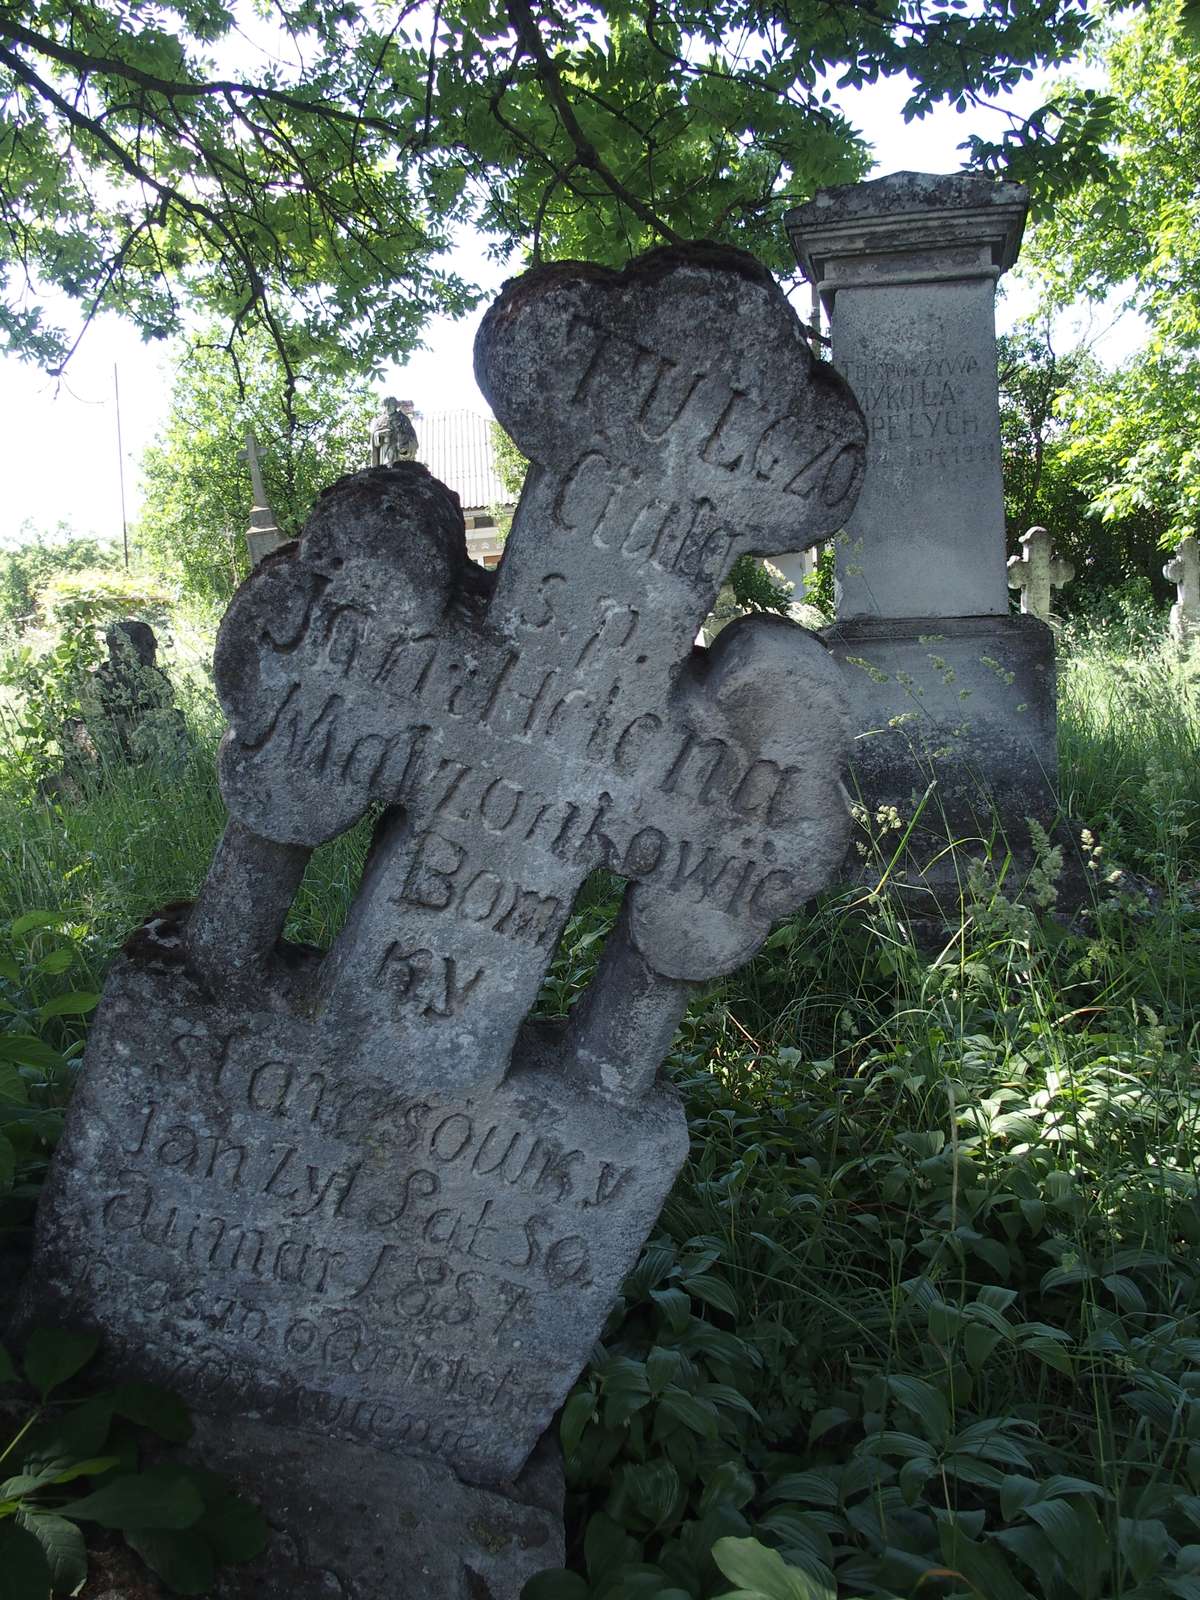 Tombstone of Helena and Jan Bomky, Zbarazh cemetery, as of 2018.